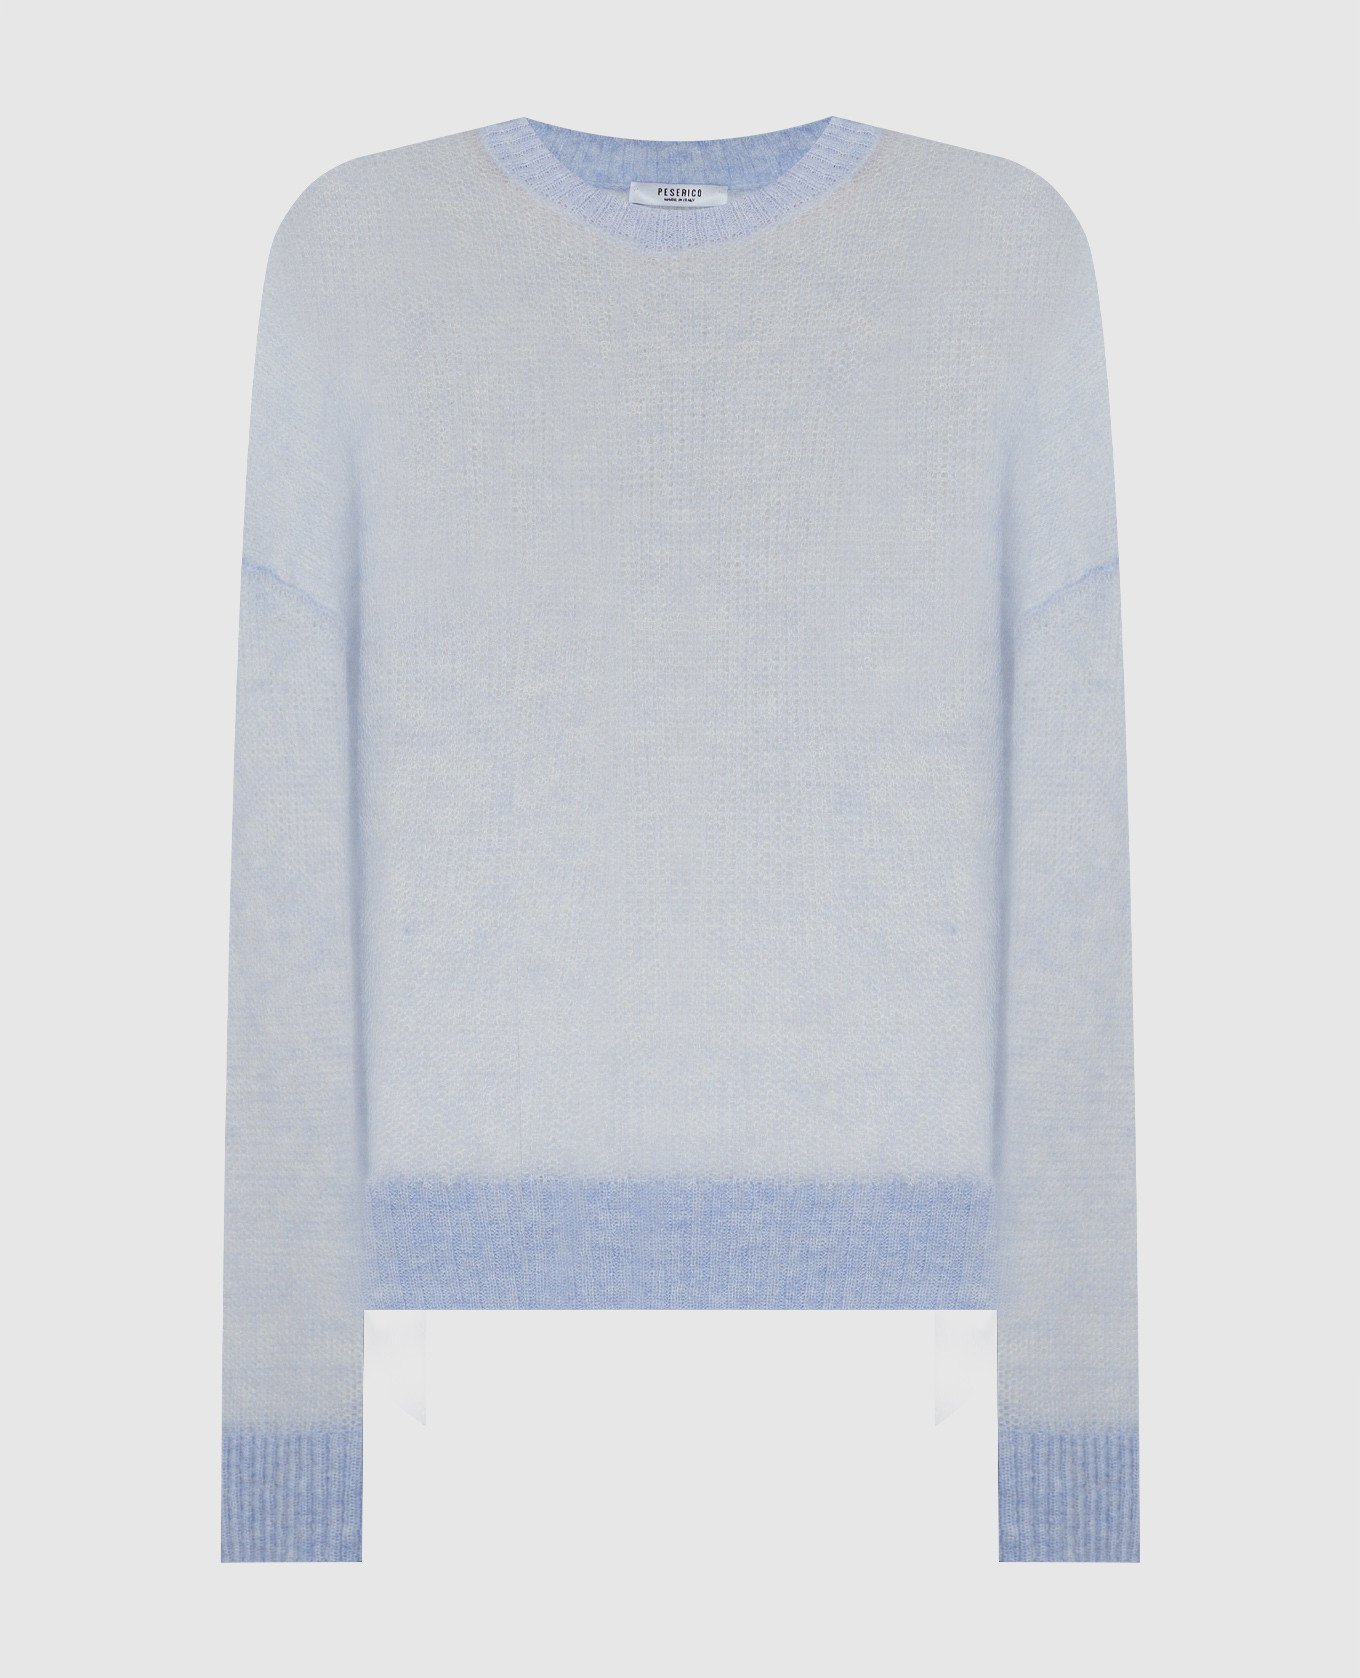 Blue jumper with wool